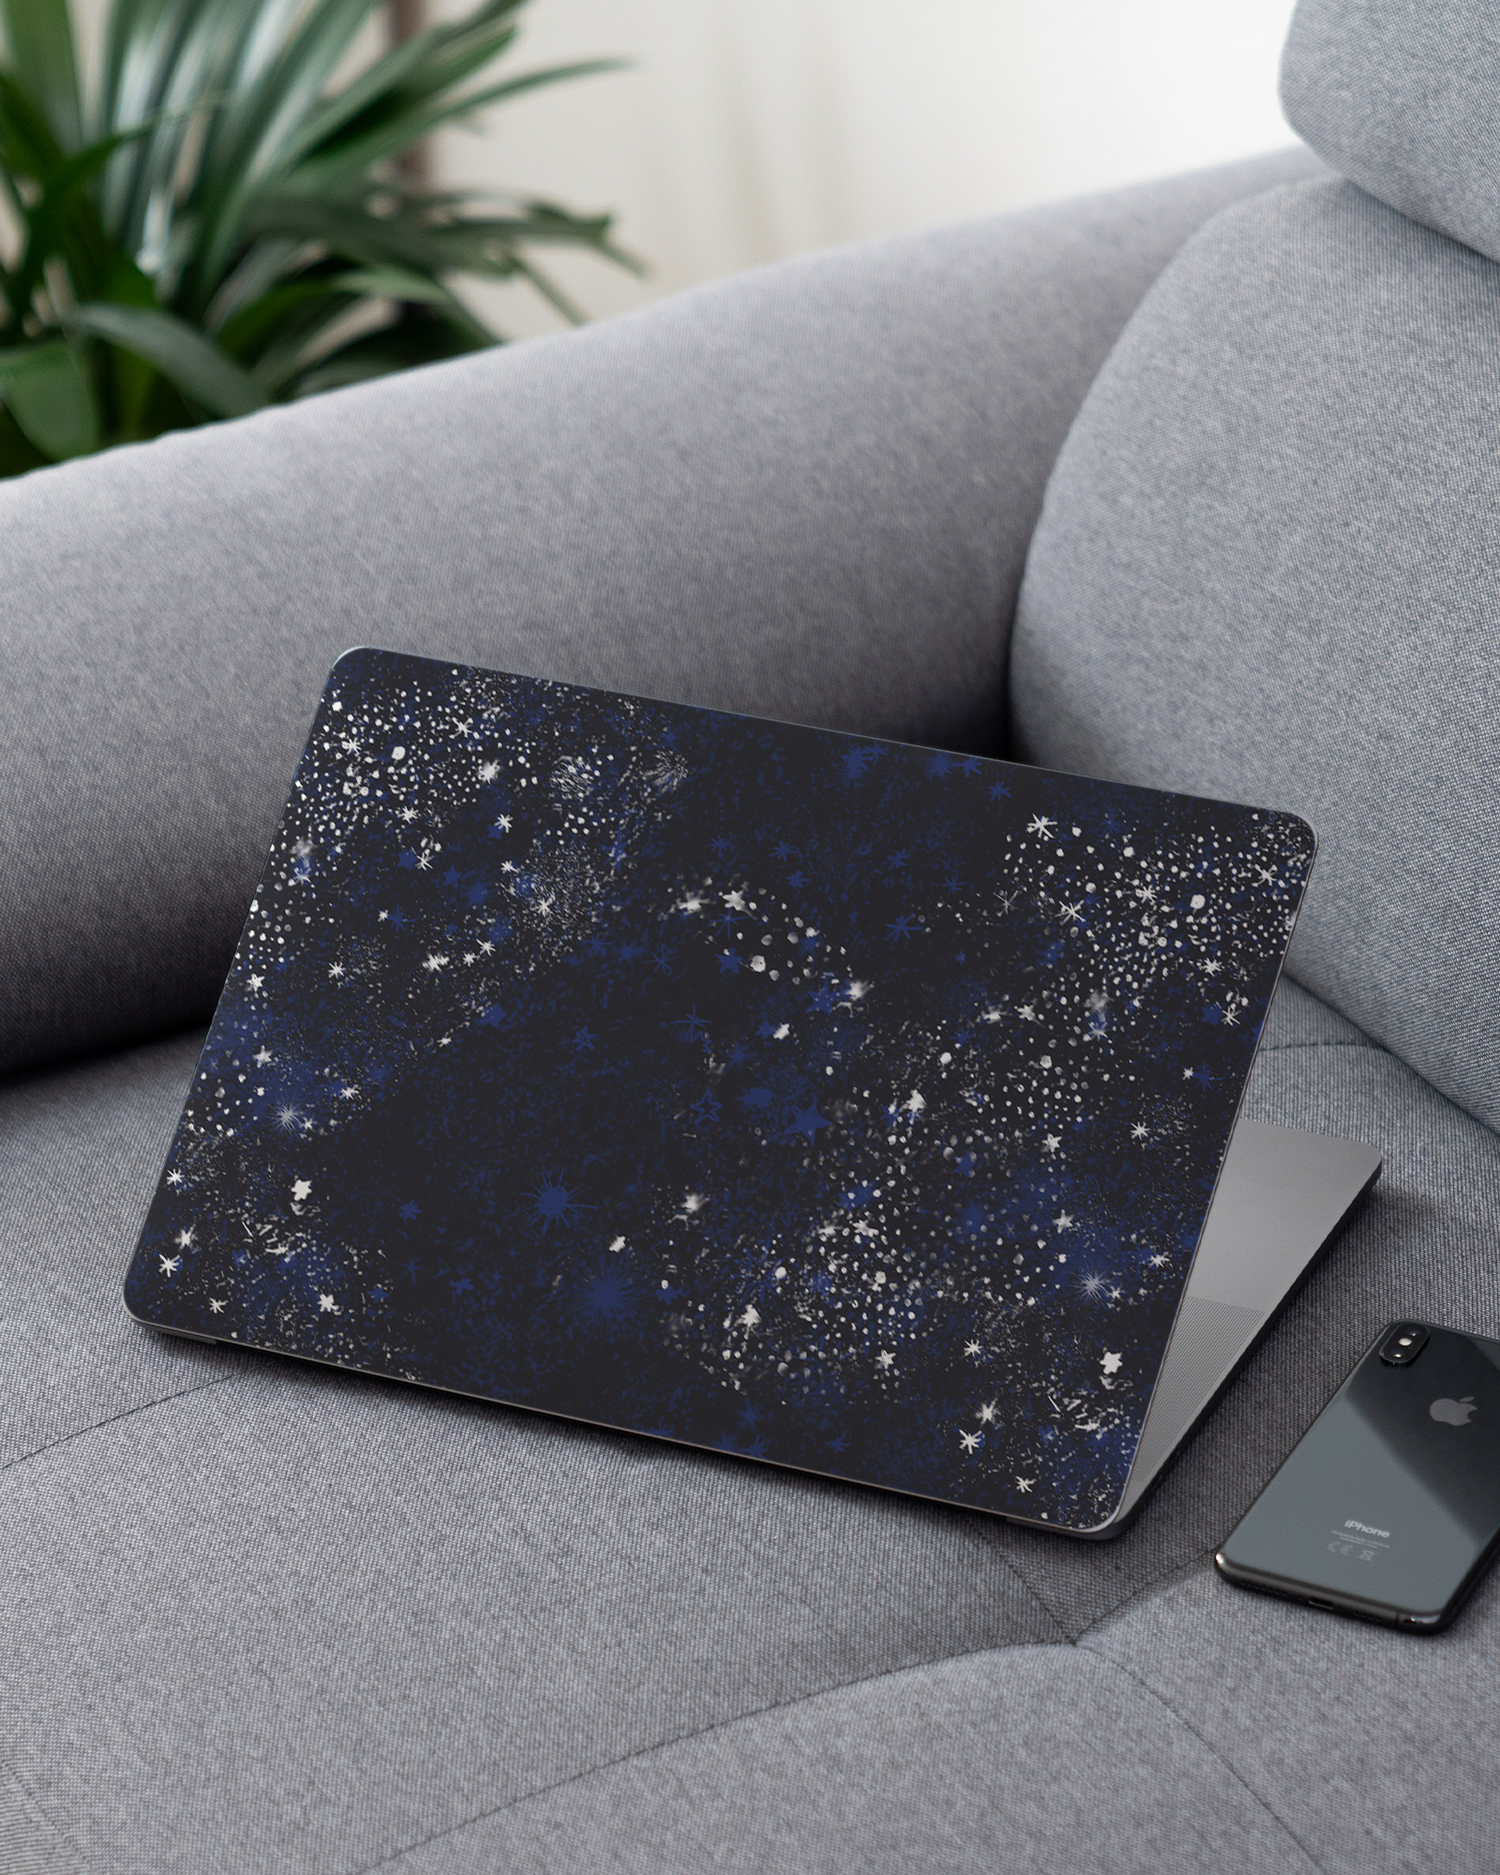 Starry Night Sky Laptop Skin for 13 inch Apple MacBooks on a couch